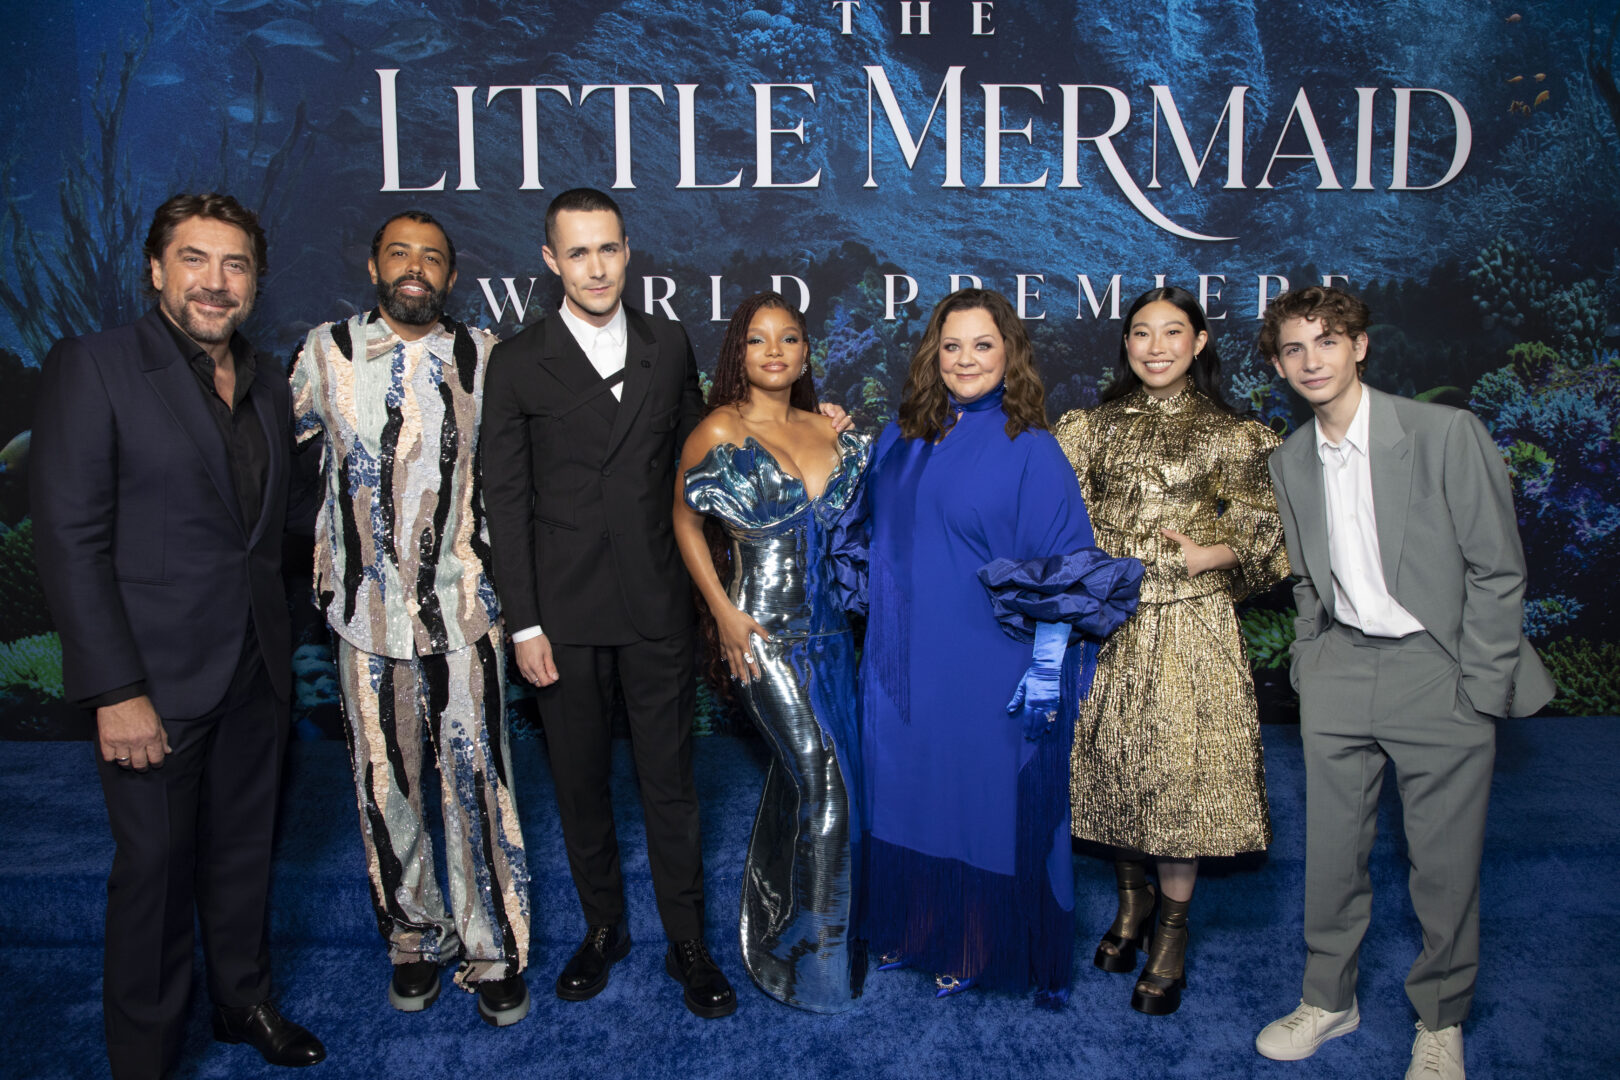 Photos & Video: Hollywood World Premiere for Disney’s Live-Action The Little Mermaid